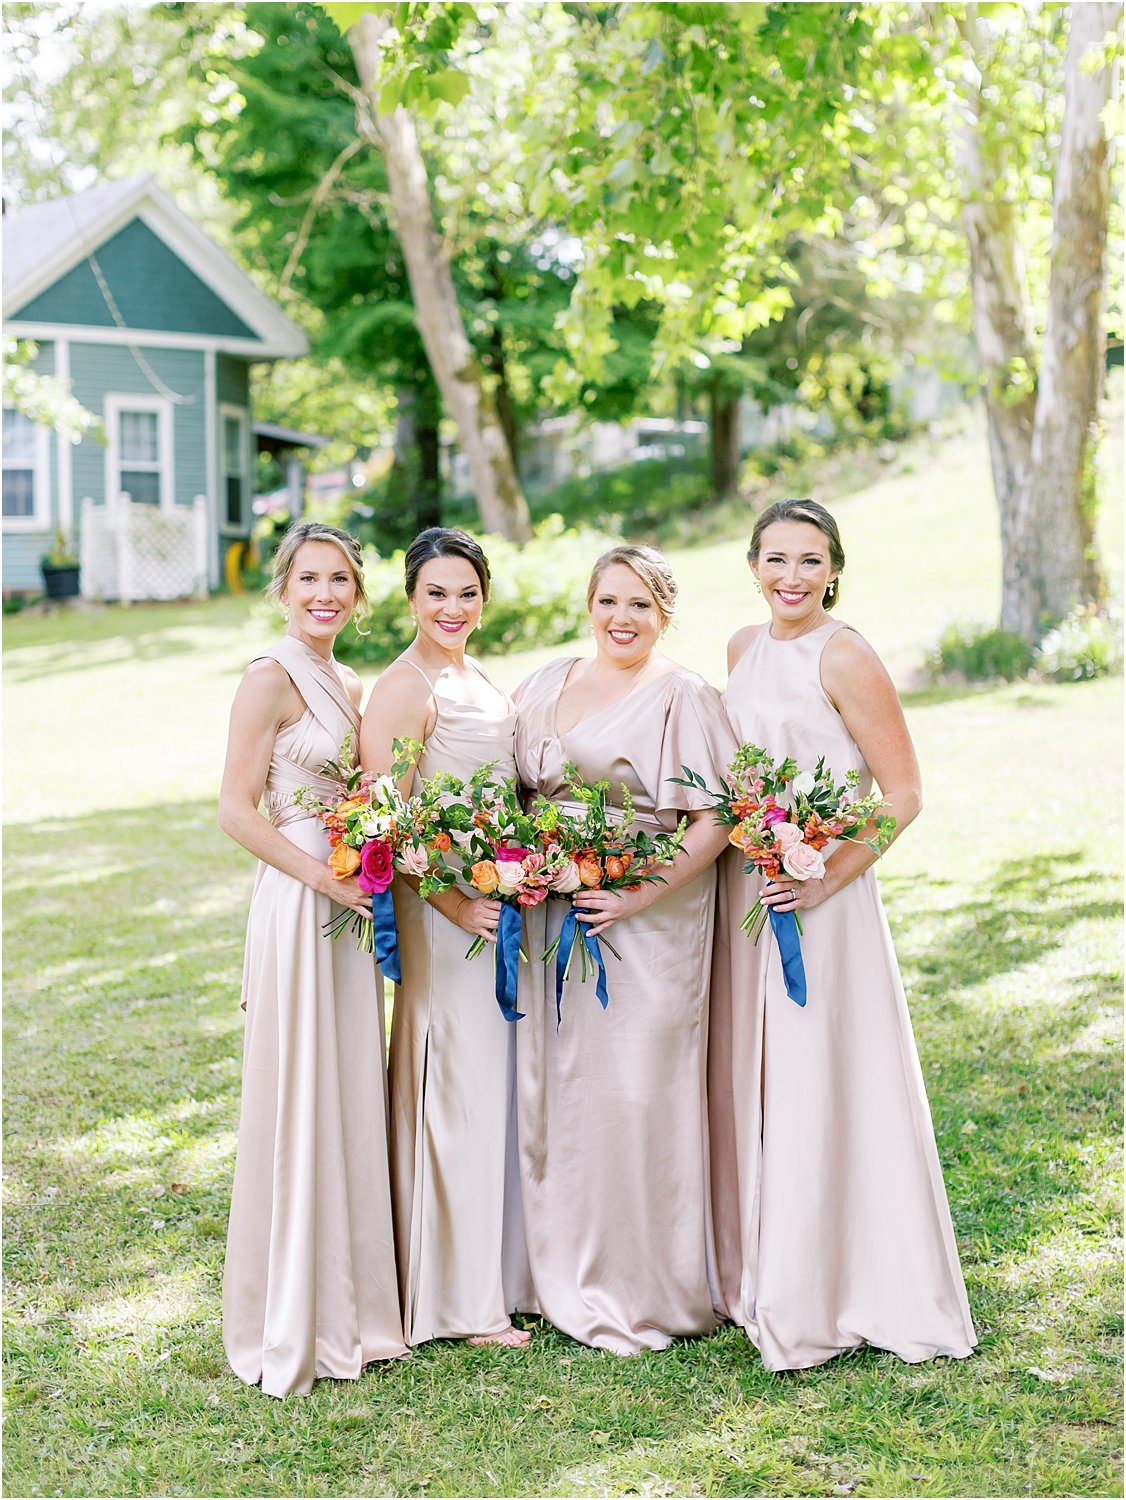 Blush neutral bridesmaid dresses with summer pops of color